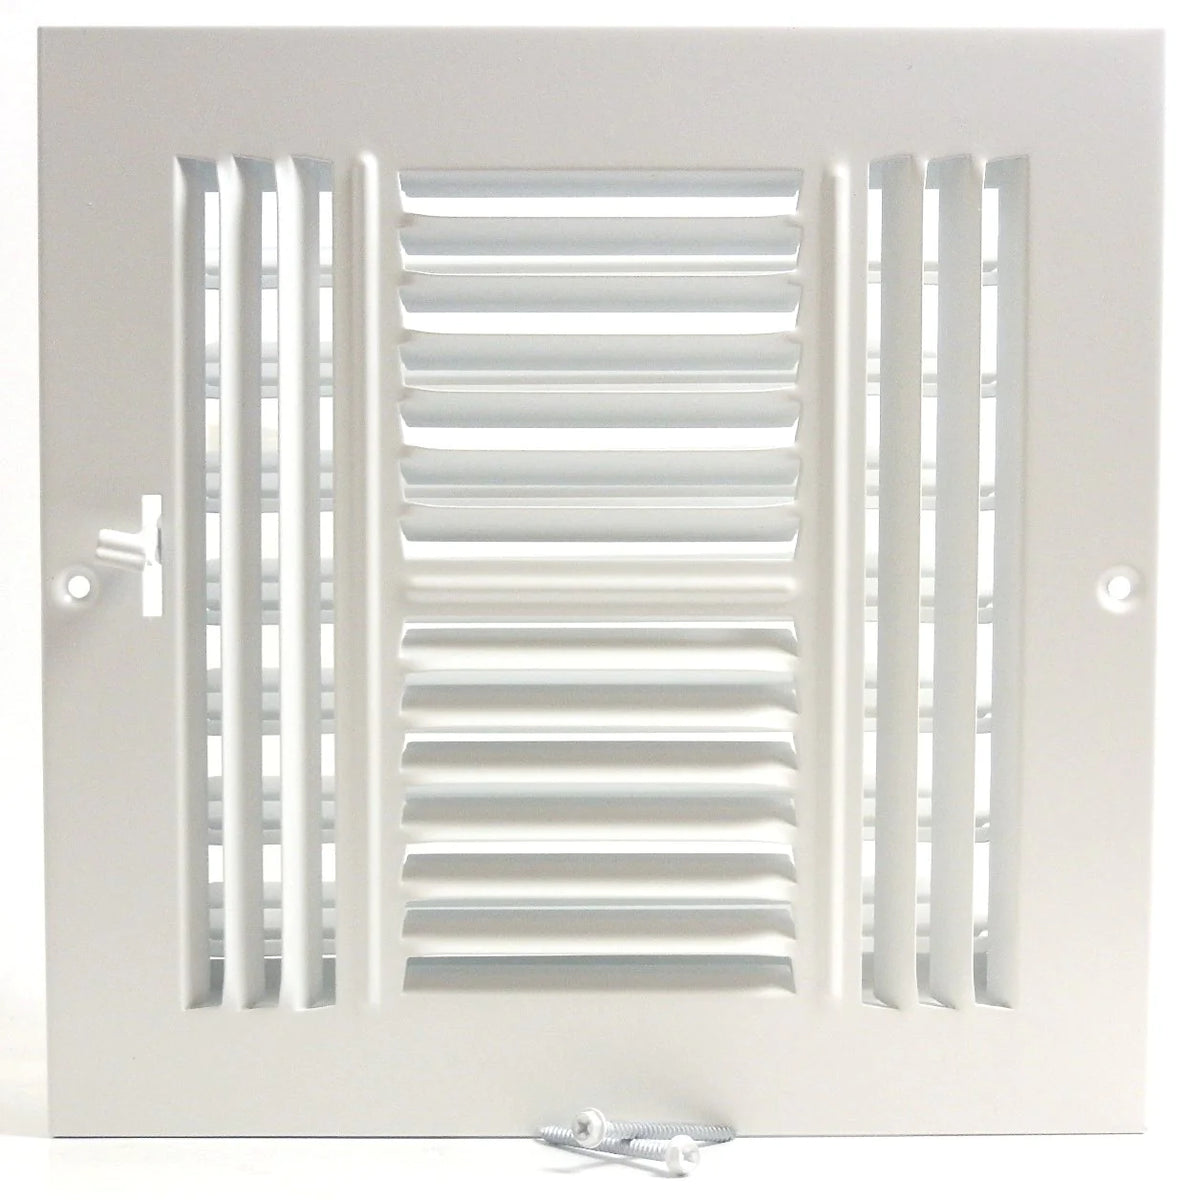 10&quot; X 8&quot; 4-Way AIR SUPPLY GRILLE - DUCT COVER &amp; DIFFUSER - Flat Stamped Face